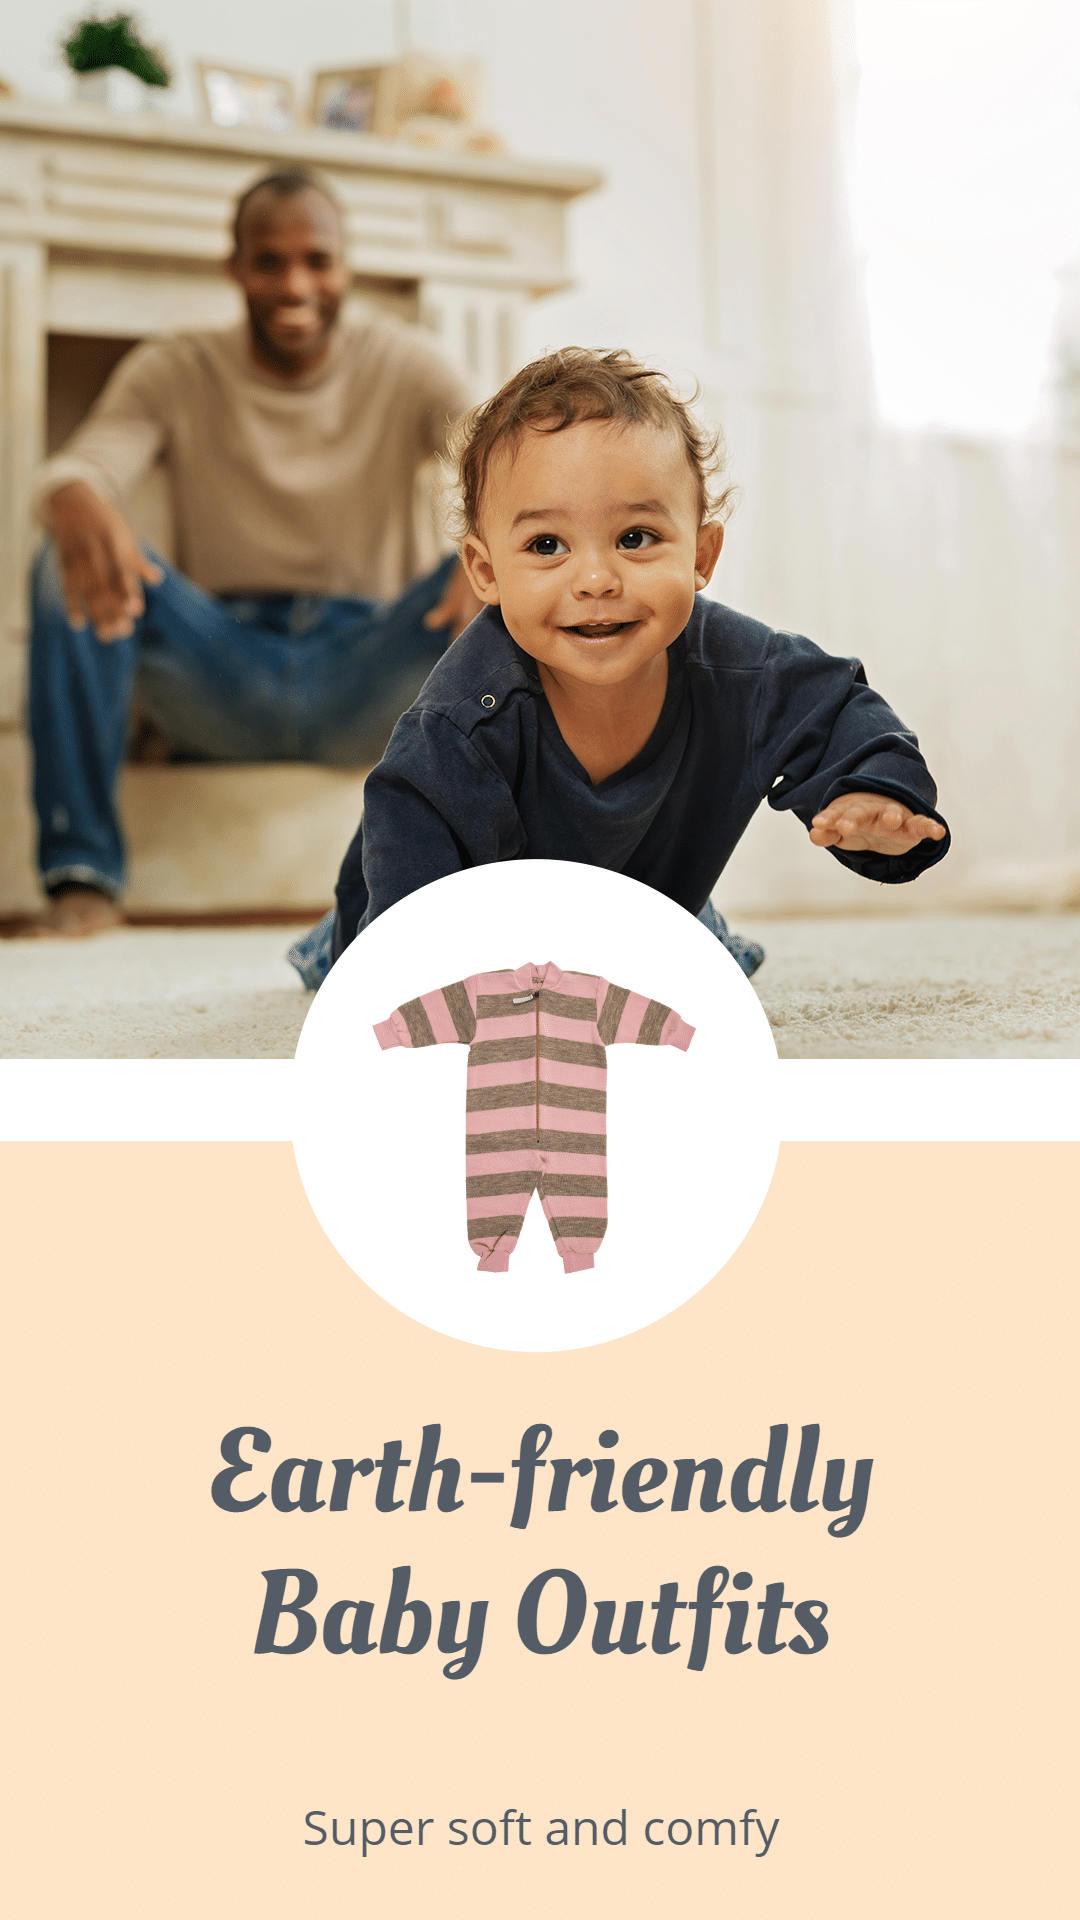 Circle Element Simple Baby Shop Outfits Display Ecommerce Story预览效果